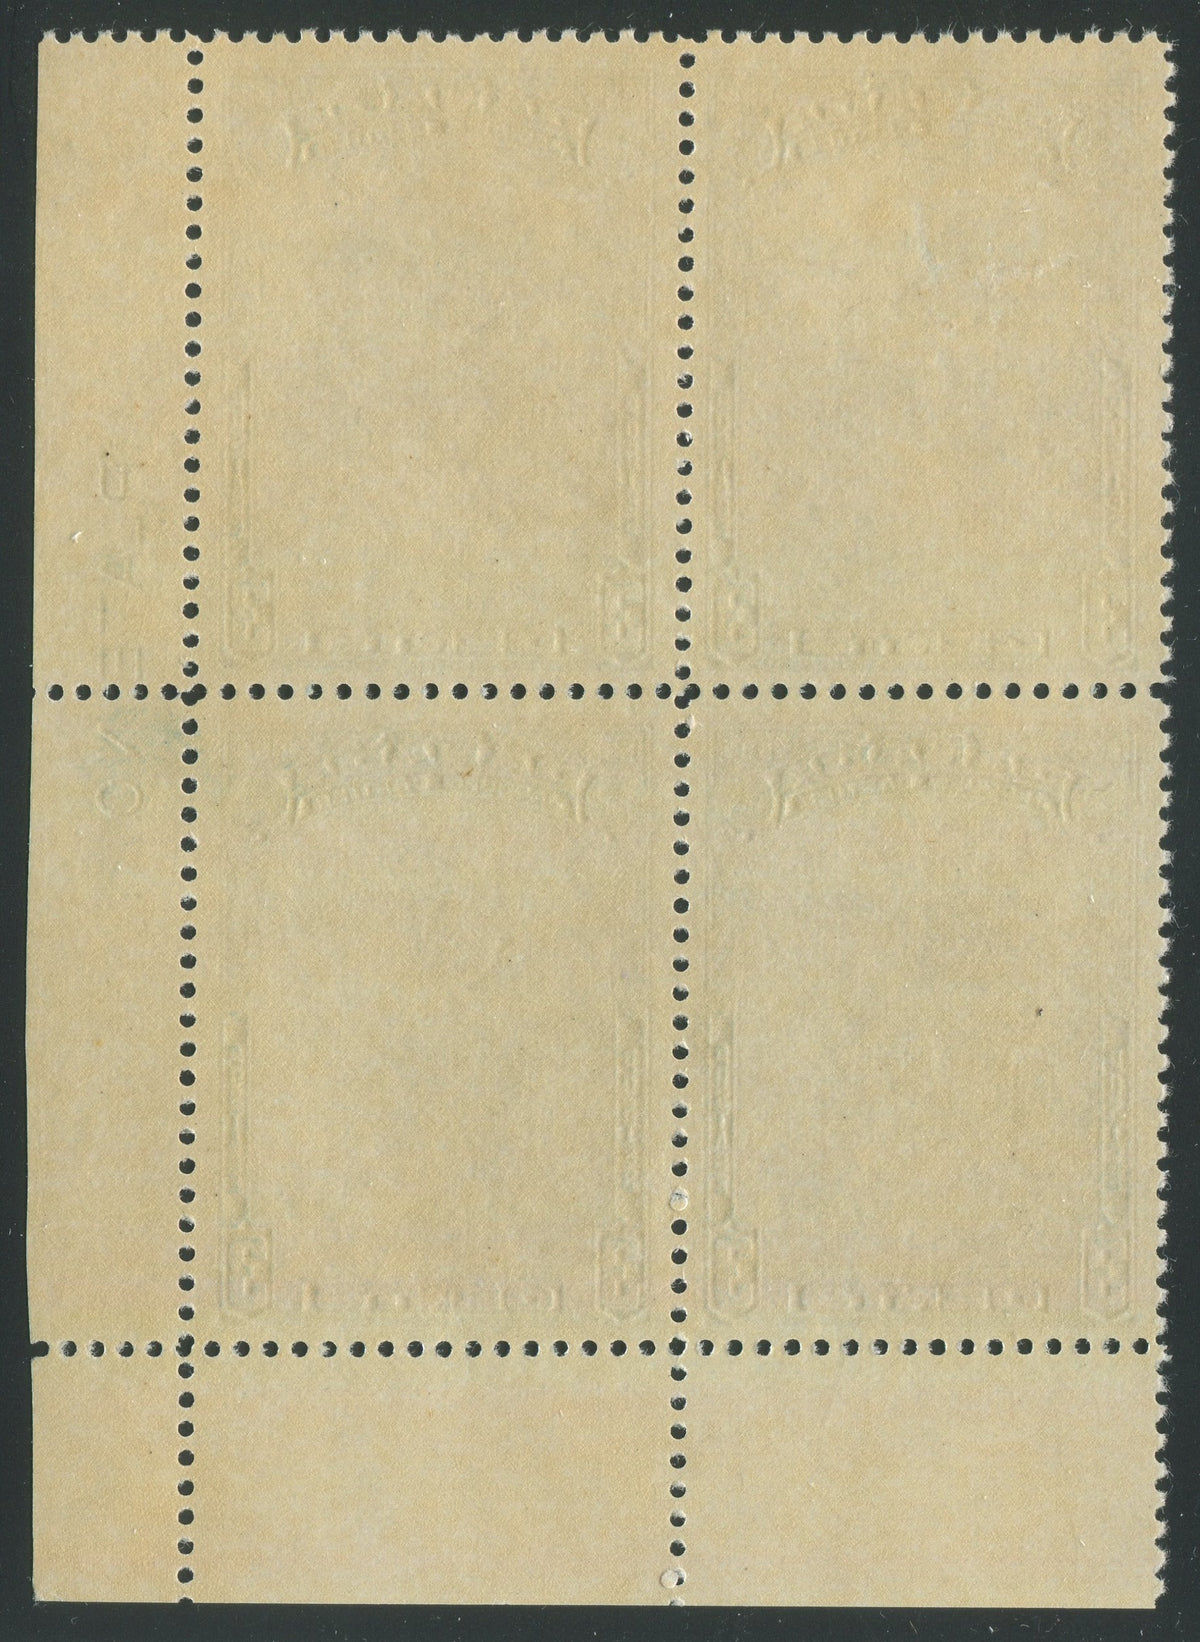 0208CA2209 - Canada #208iii Plate Block, &#39;Hairline from Hand&#39;